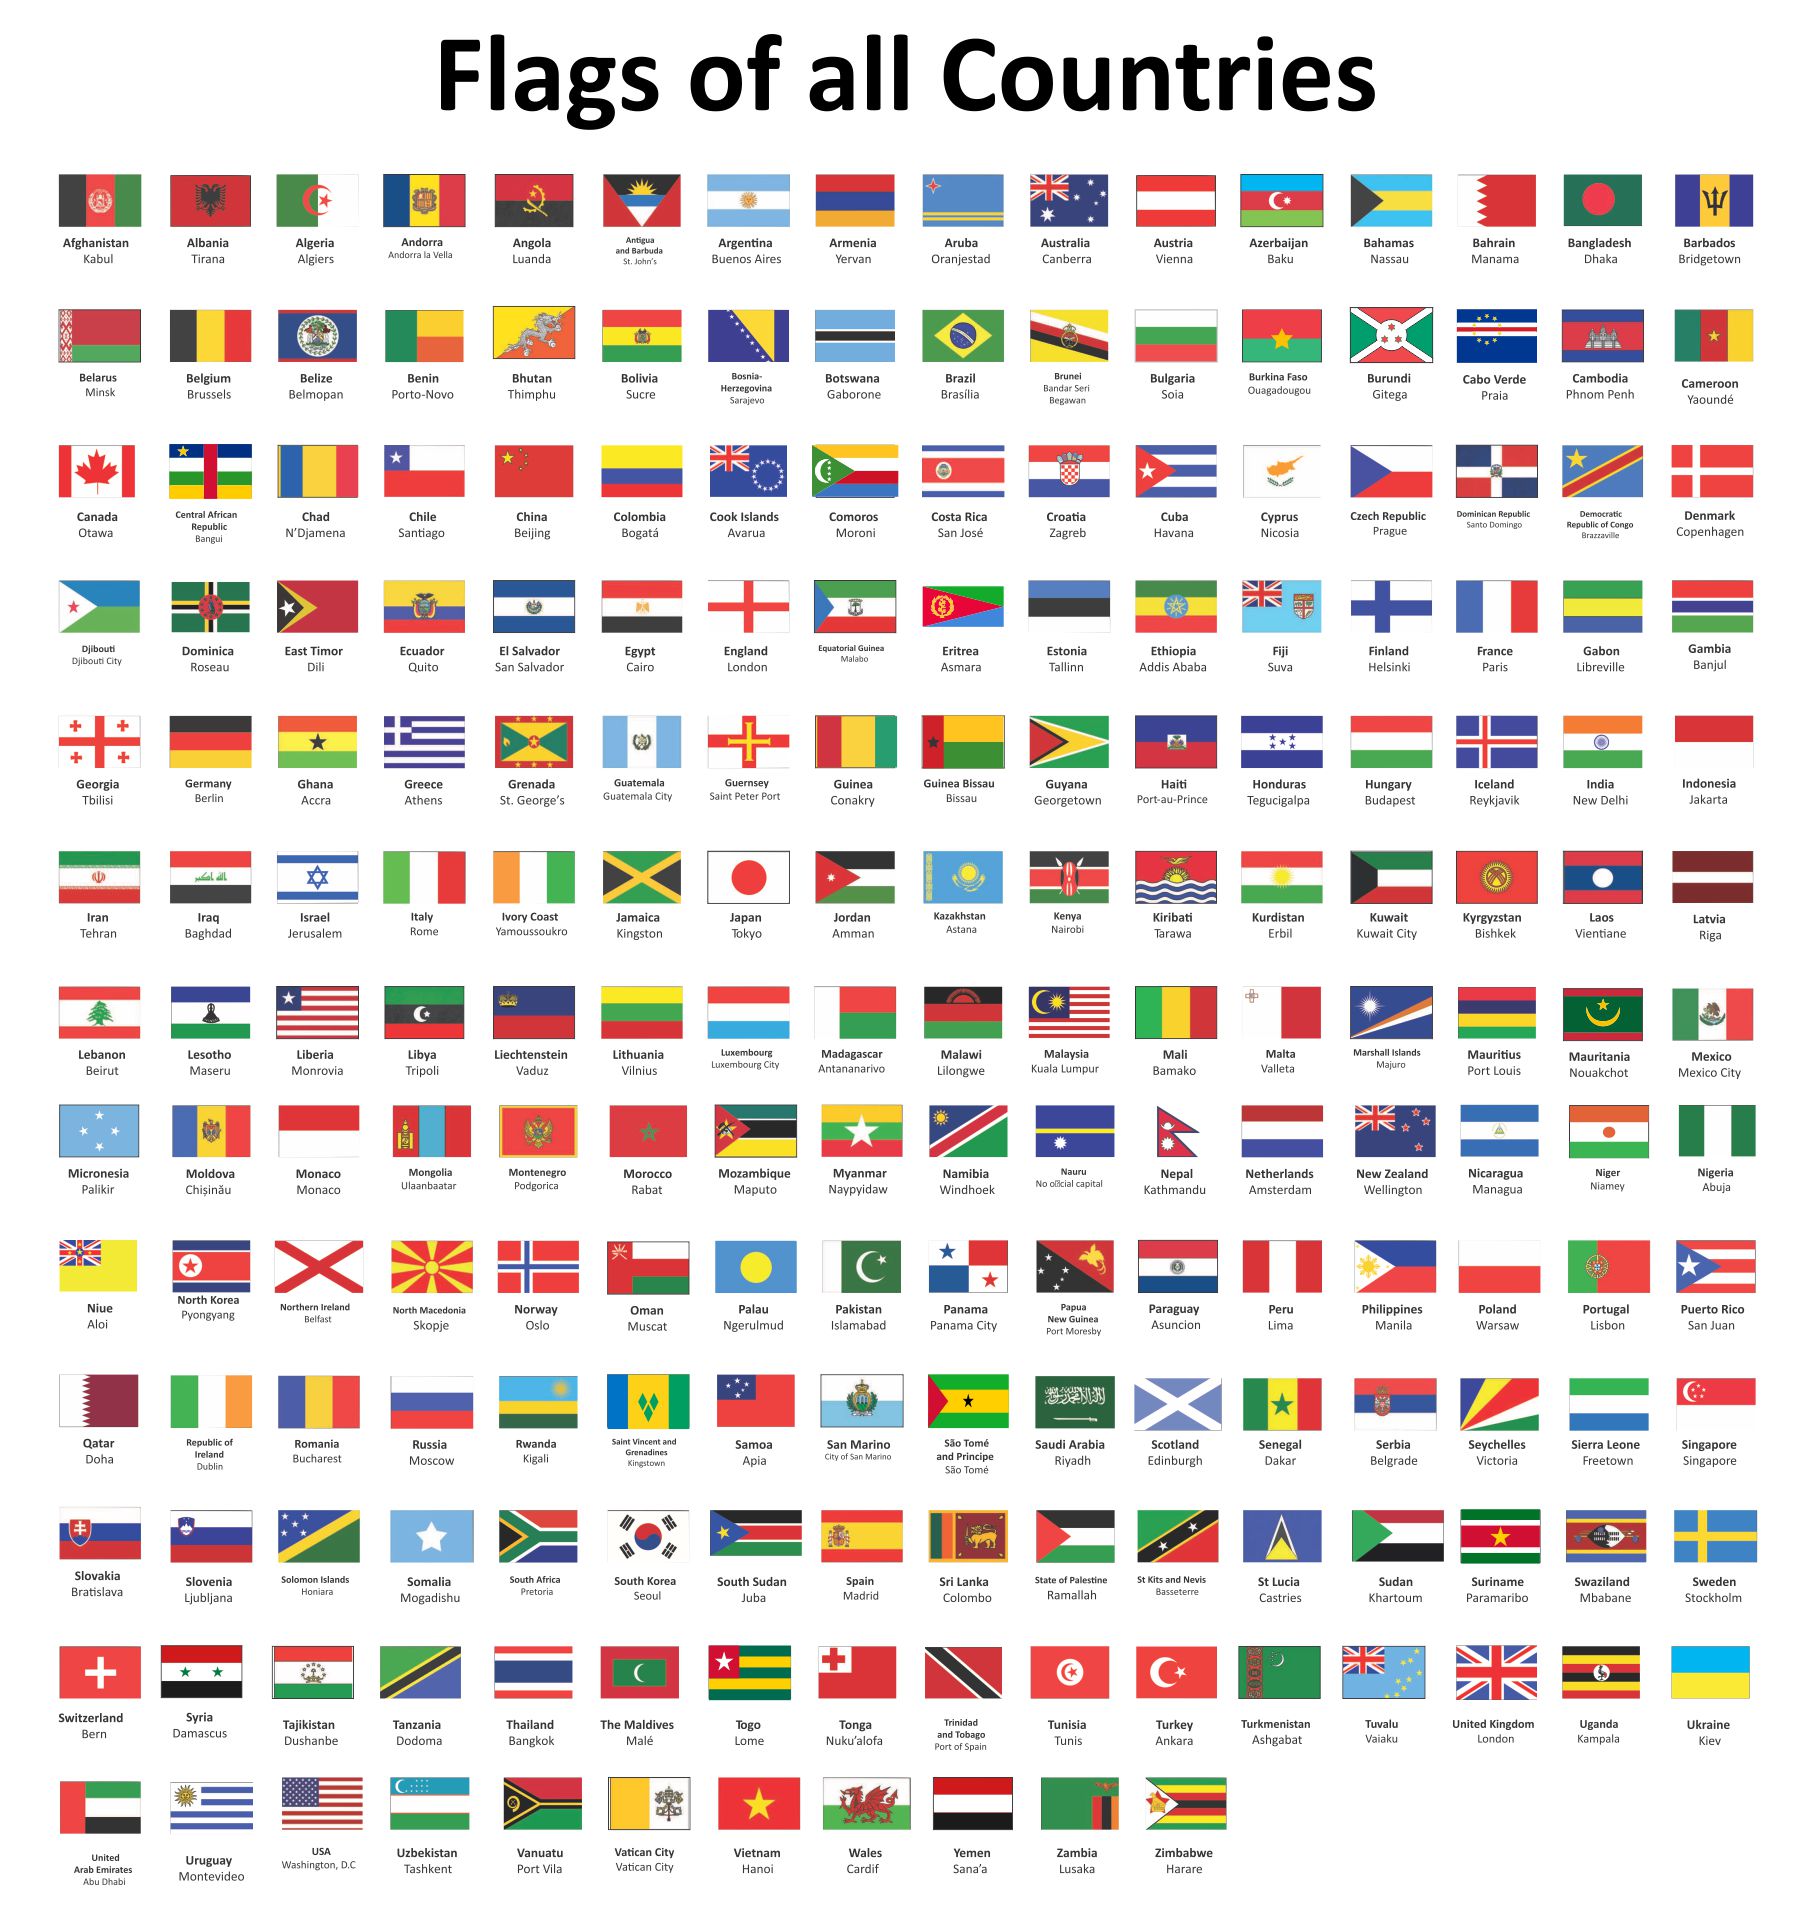 Flags Of The World Printable